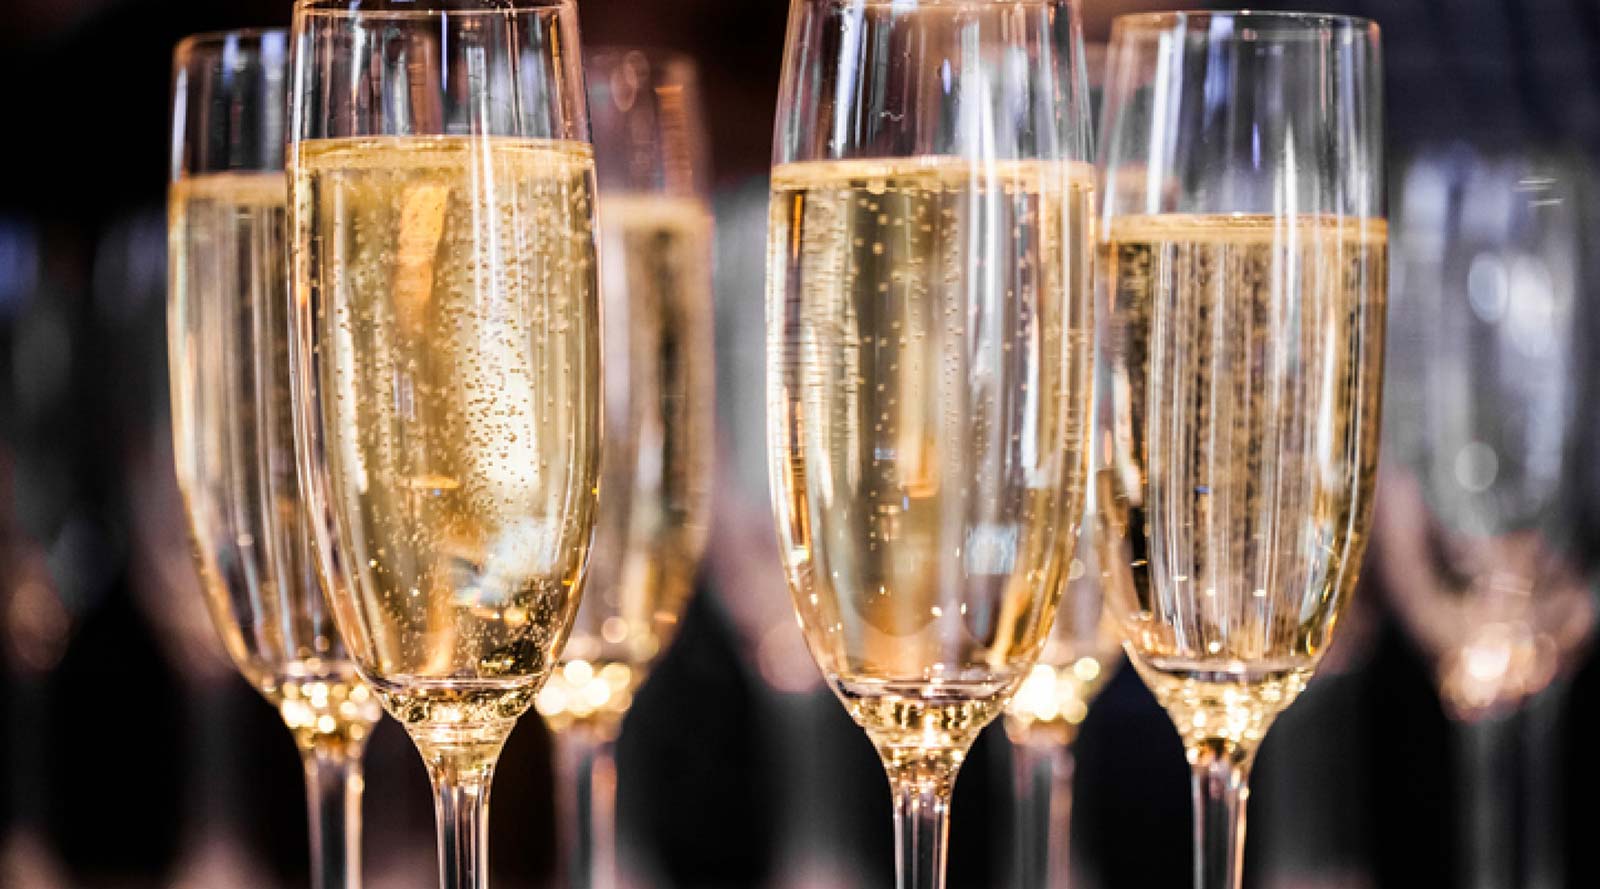 Grab Some Food at This All-Day Buffet to Find Out What People Secretly Dislike About You Champagne